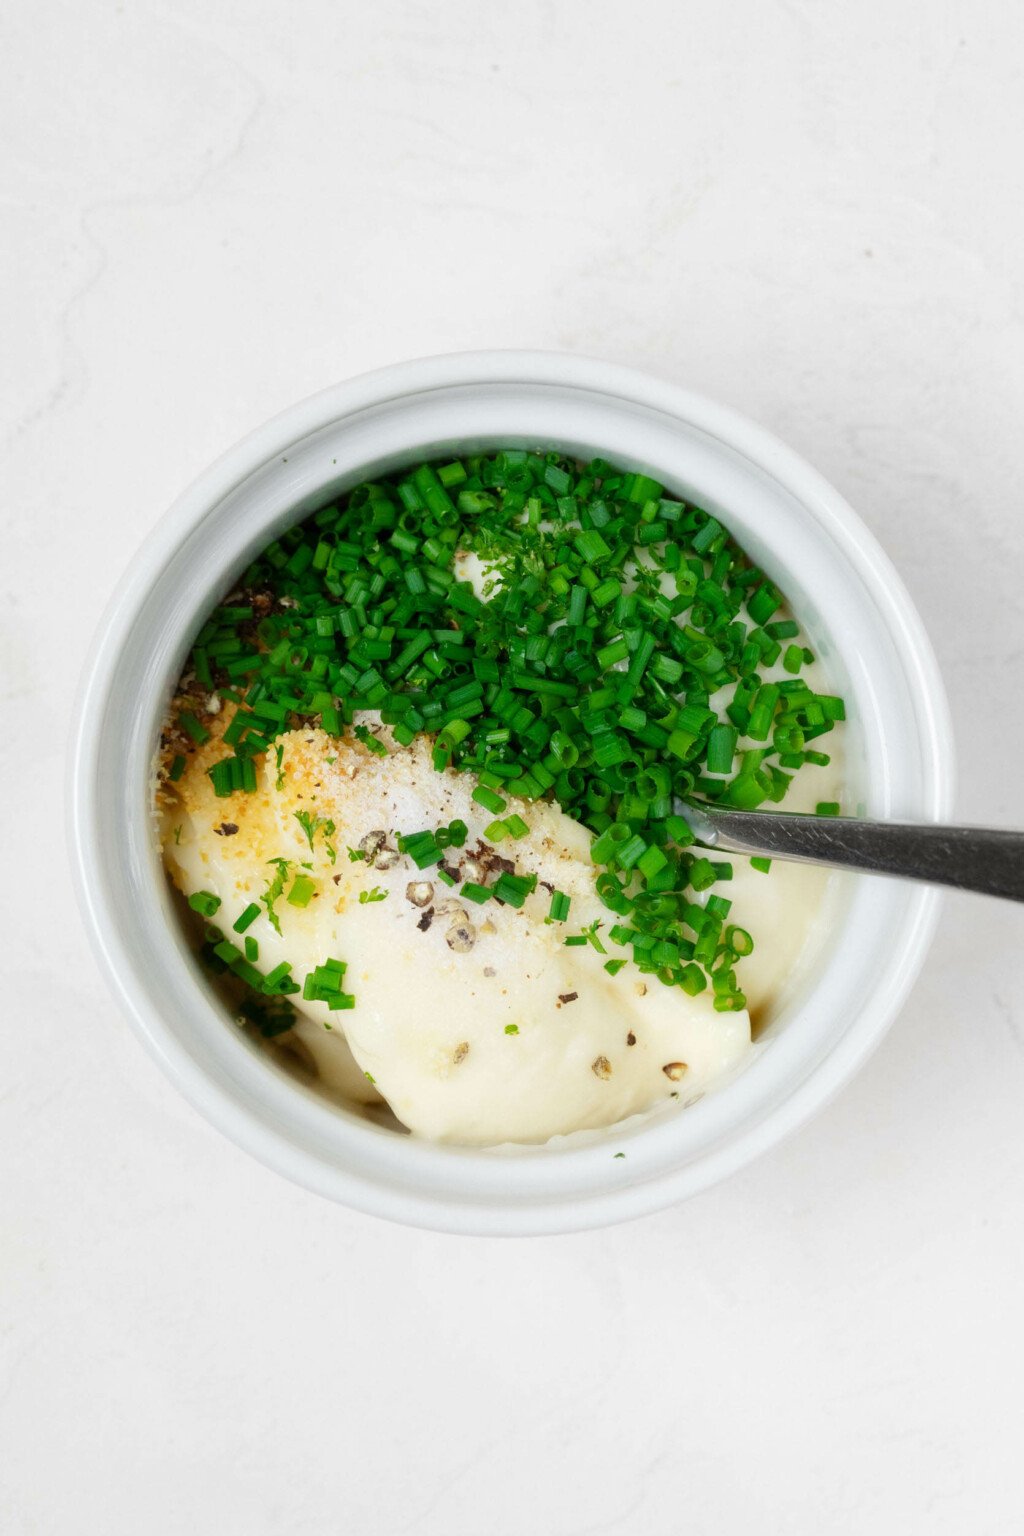 A small, white ramekin is filled with pale yellow mayonnaise and chopped green chives.